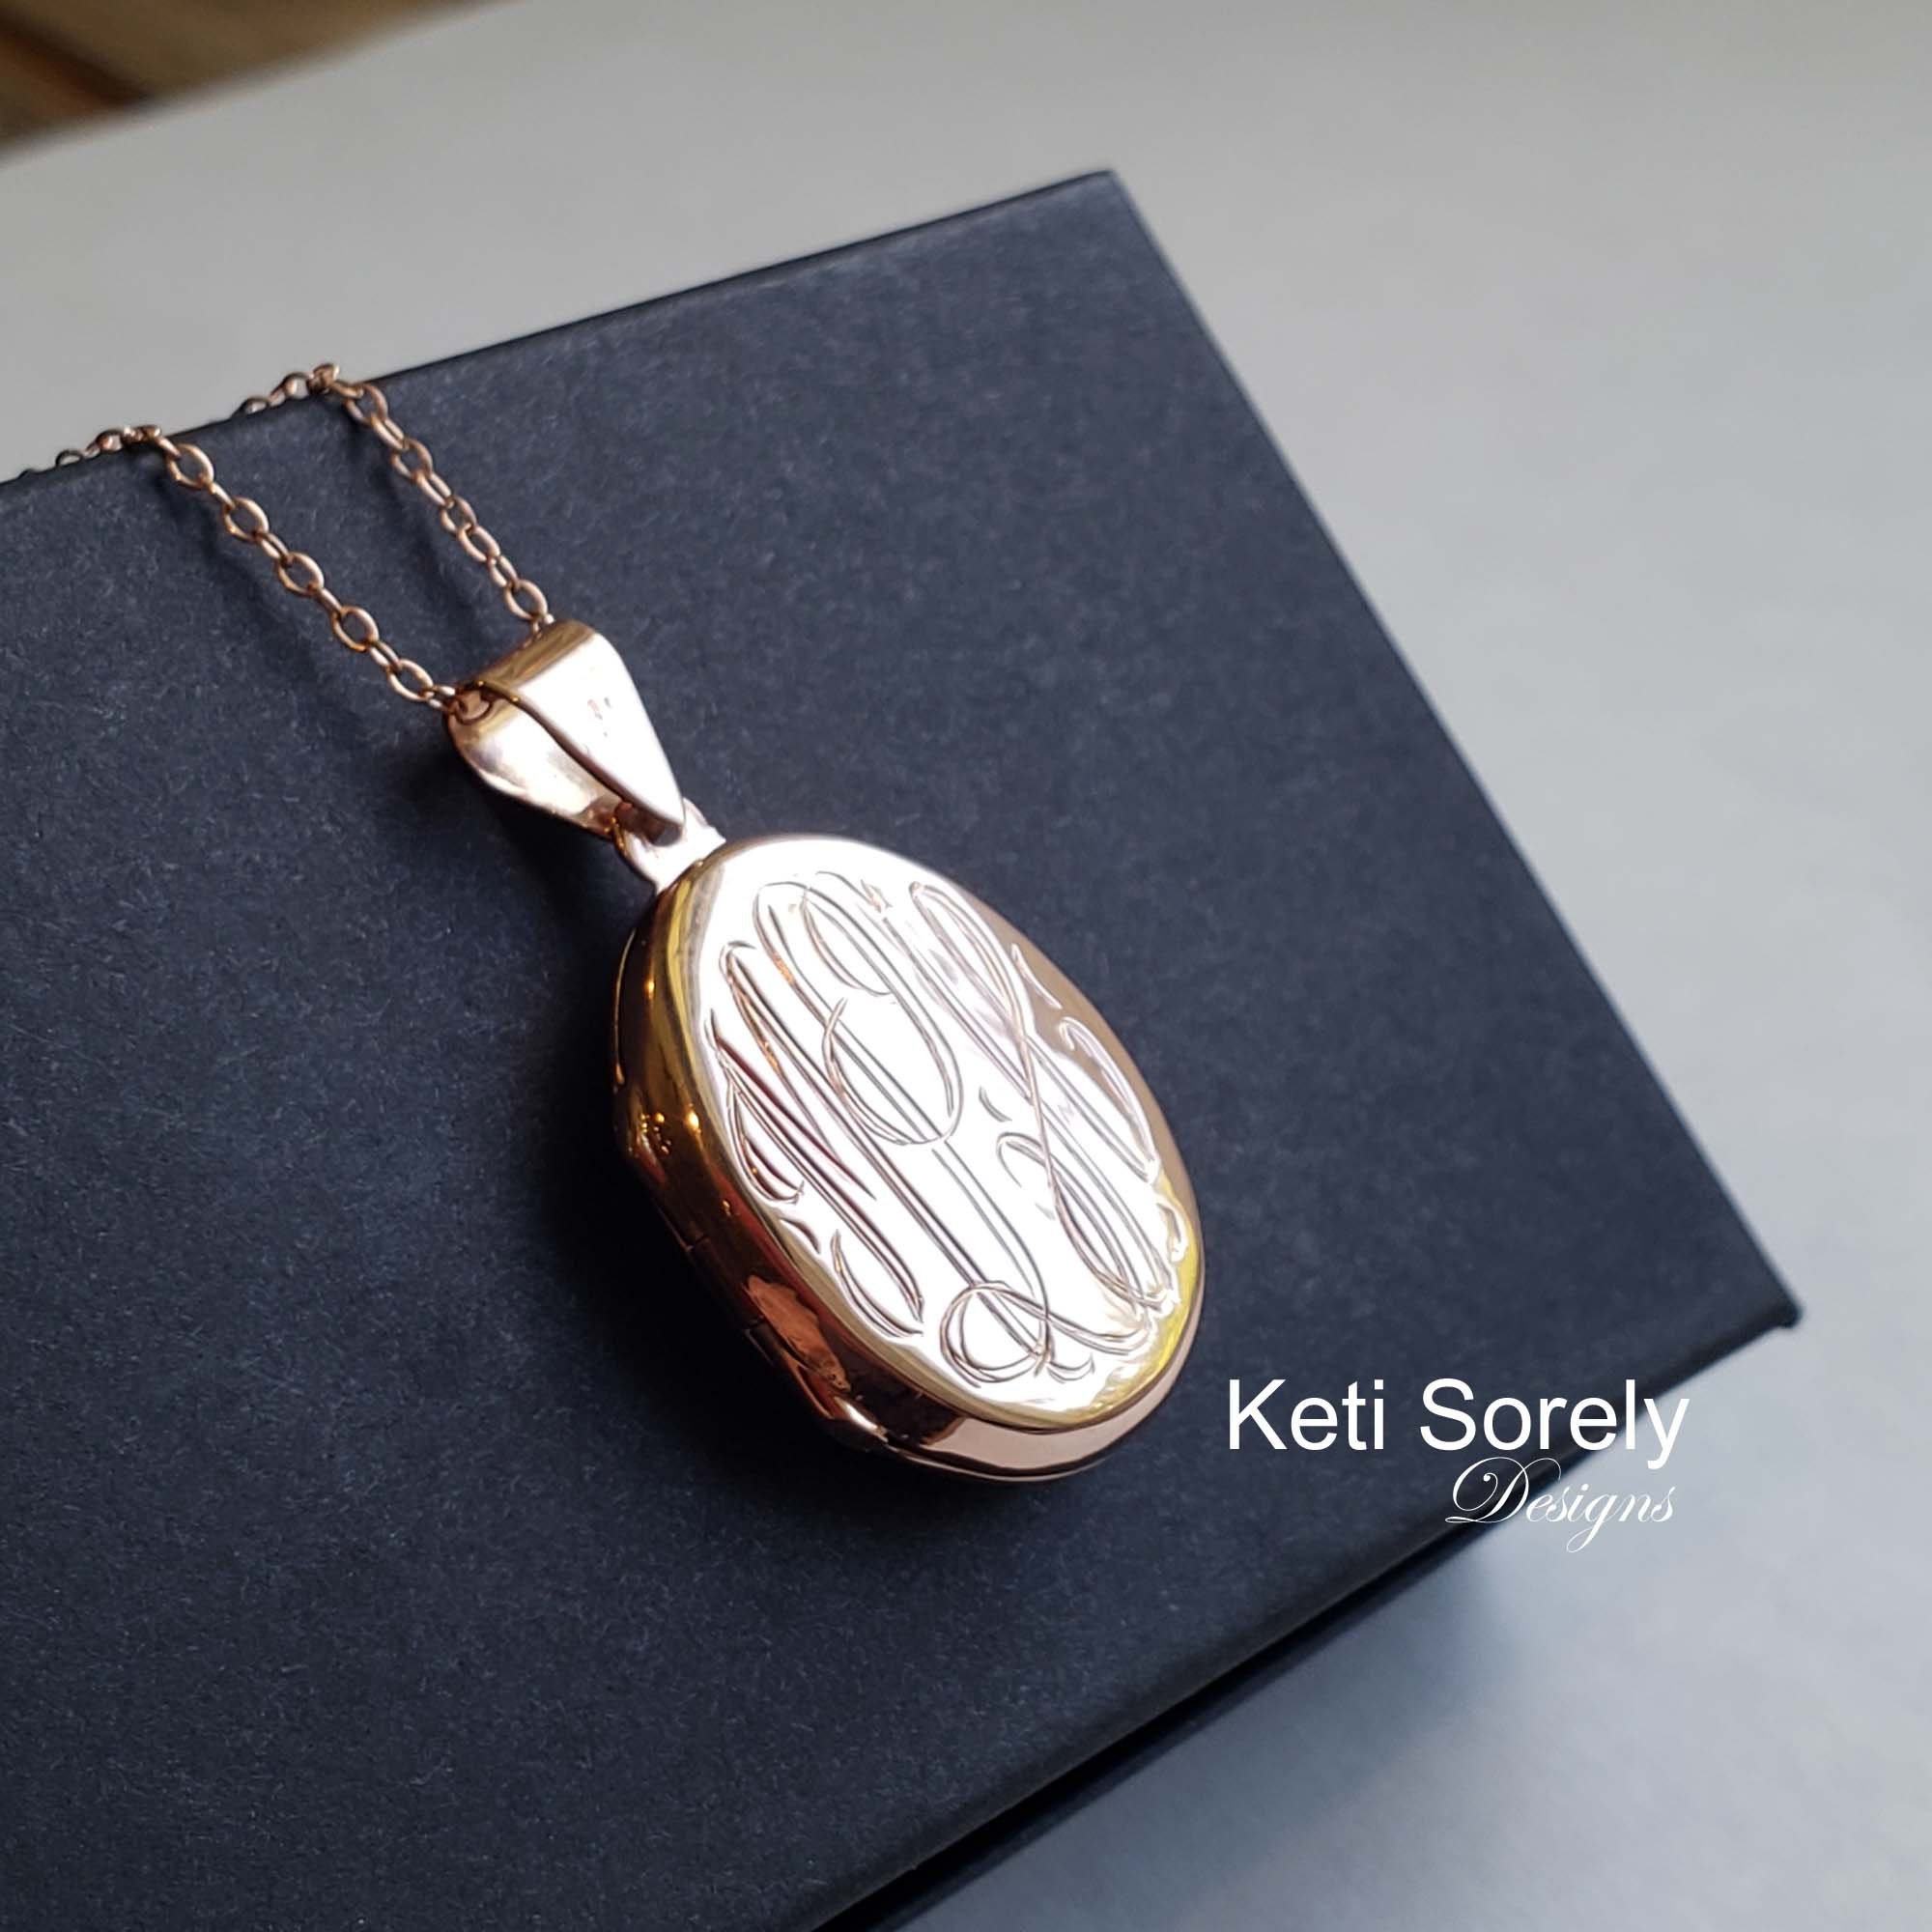 Oval Monogram Locket with Hand Engraved initials - Swirly initials Photo Locket - Sterling Silver, Yellow Gold or Rose Gold, Photo Locket